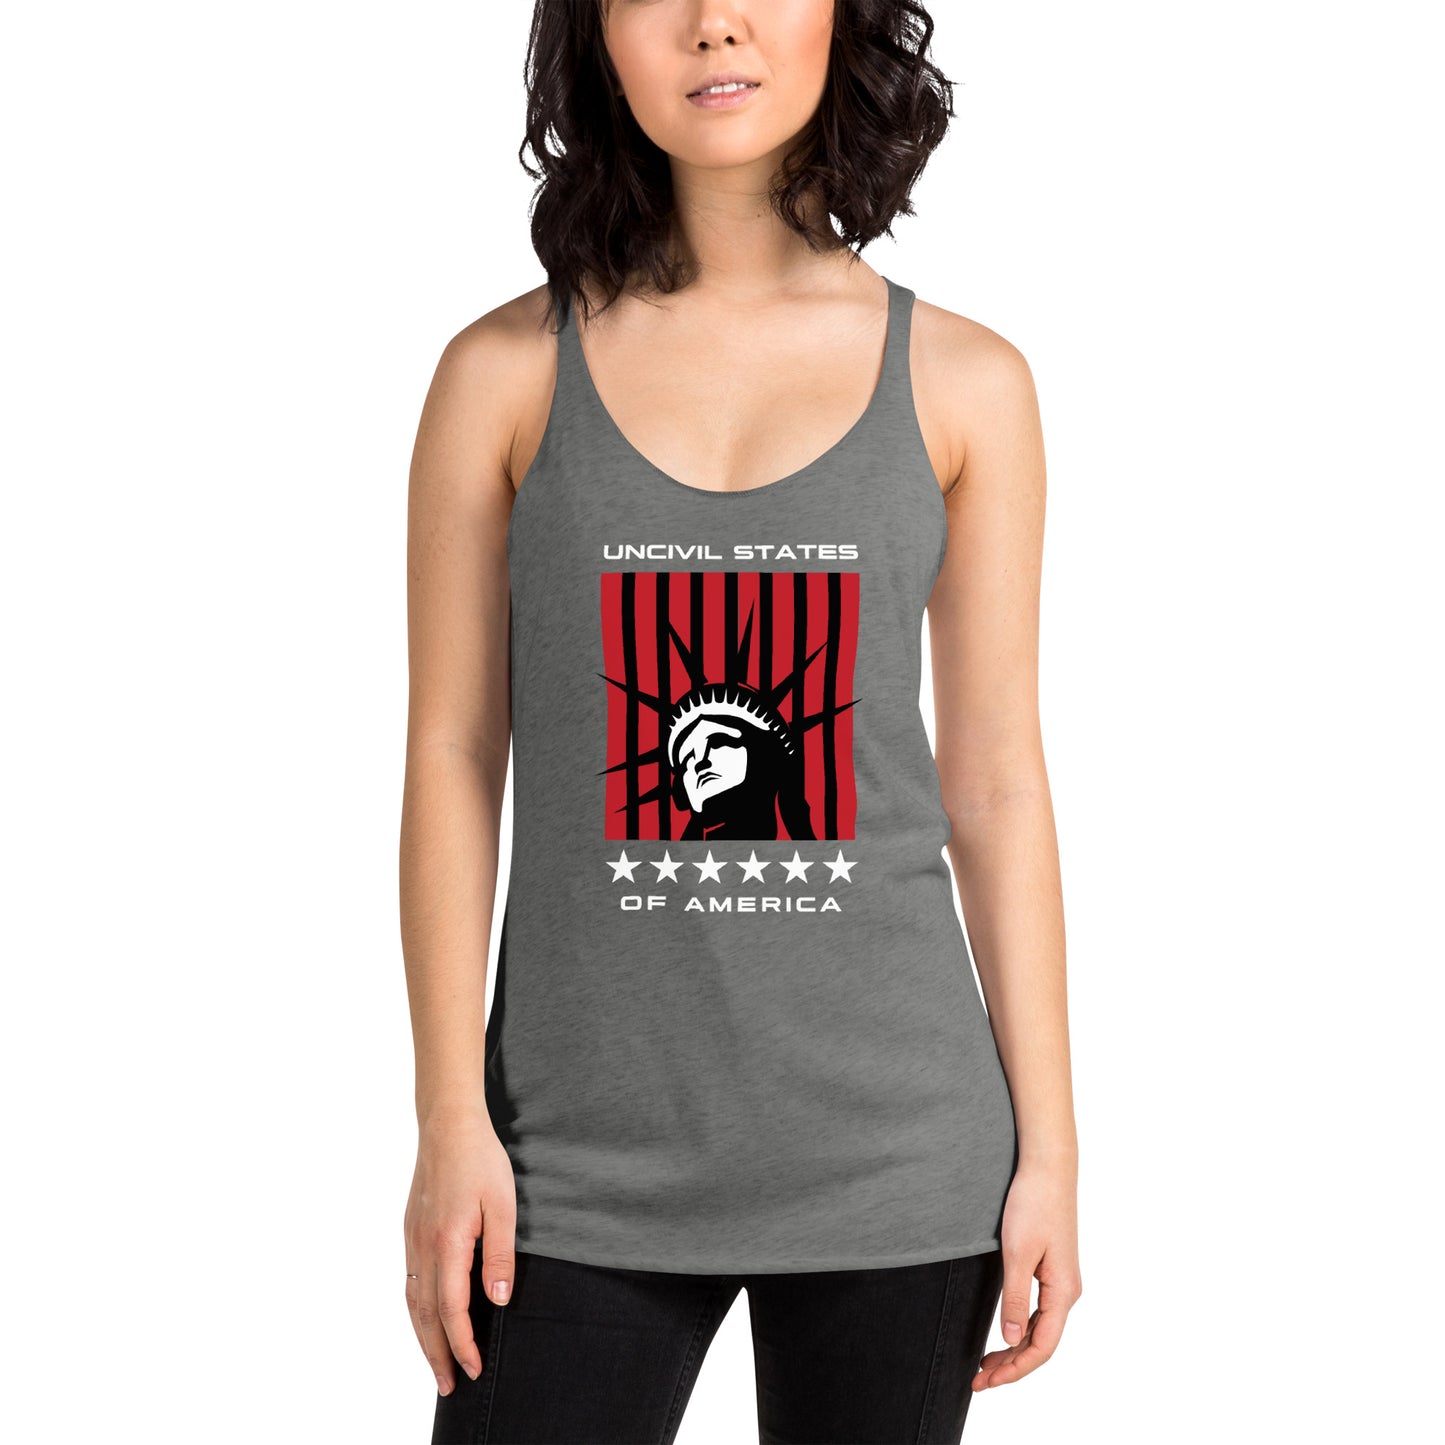 Disrupt the ordinary with our UNCIVIL States of America racerback tank - a soft, lightweight, and form-fitting with a flattering cut and raw edge seams for an edgy touch. Vintage Grey women's tank top.